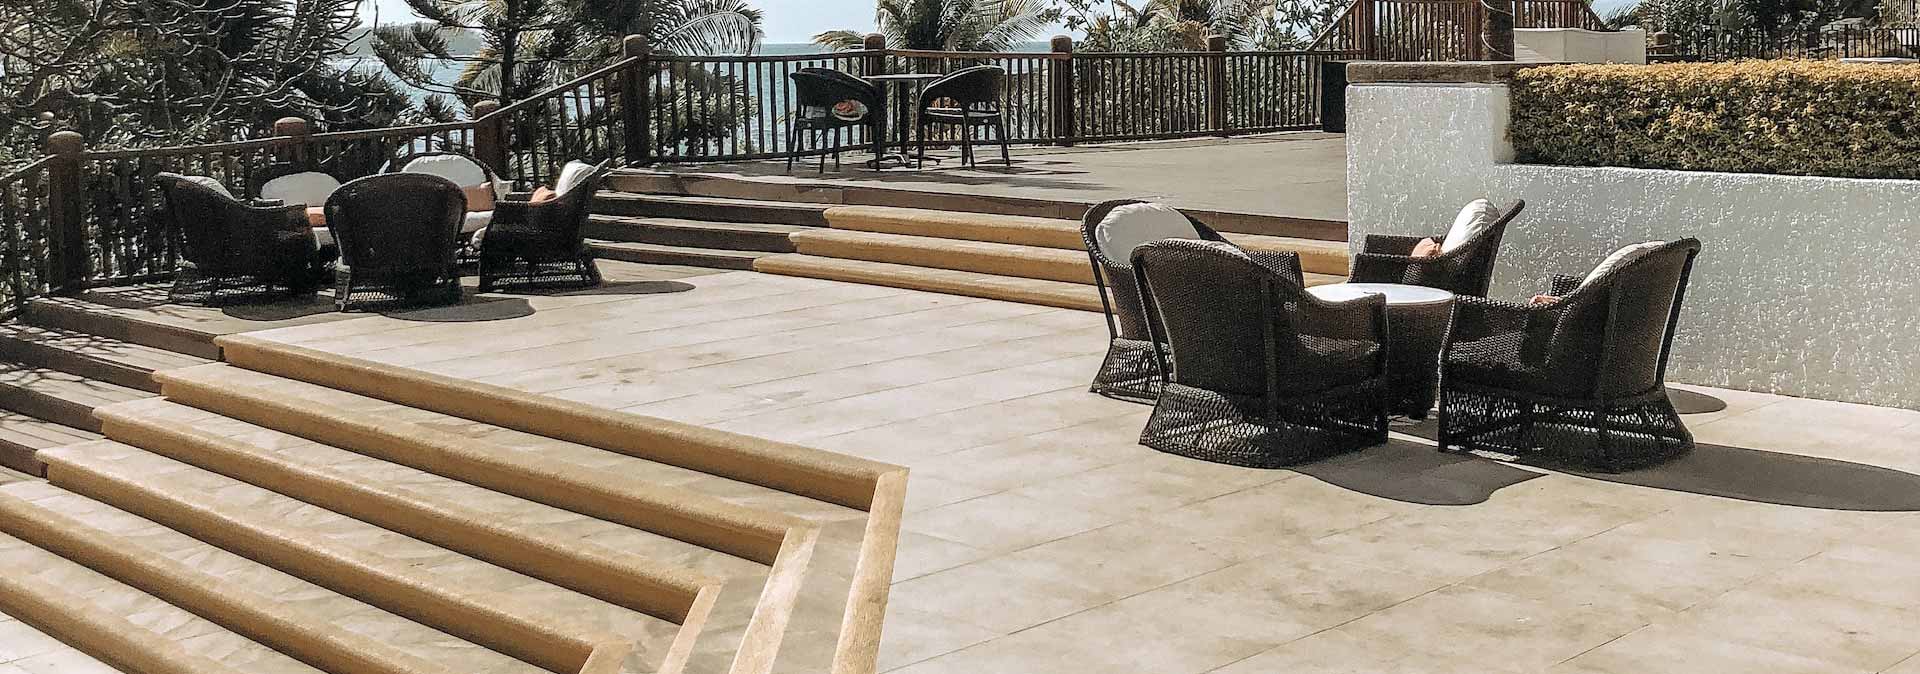 Outdoor Stoneworks - Impress Tiling and Waterproofing